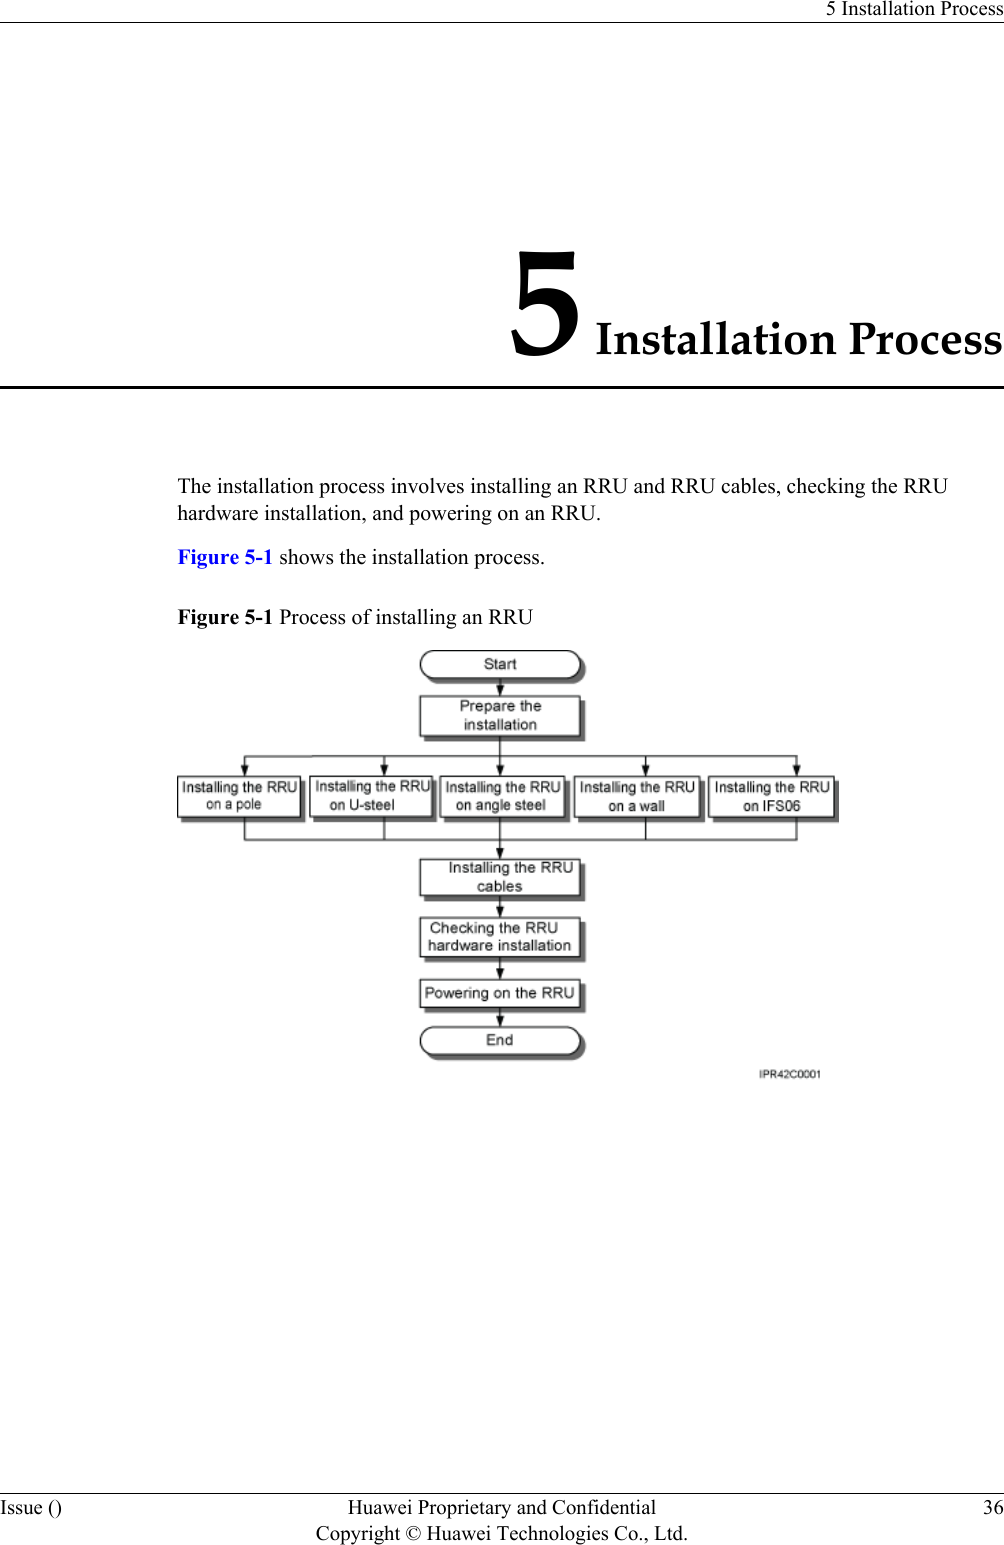 5 Installation ProcessThe installation process involves installing an RRU and RRU cables, checking the RRUhardware installation, and powering on an RRU.Figure 5-1 shows the installation process.Figure 5-1 Process of installing an RRU5 Installation ProcessIssue () Huawei Proprietary and ConfidentialCopyright © Huawei Technologies Co., Ltd.36